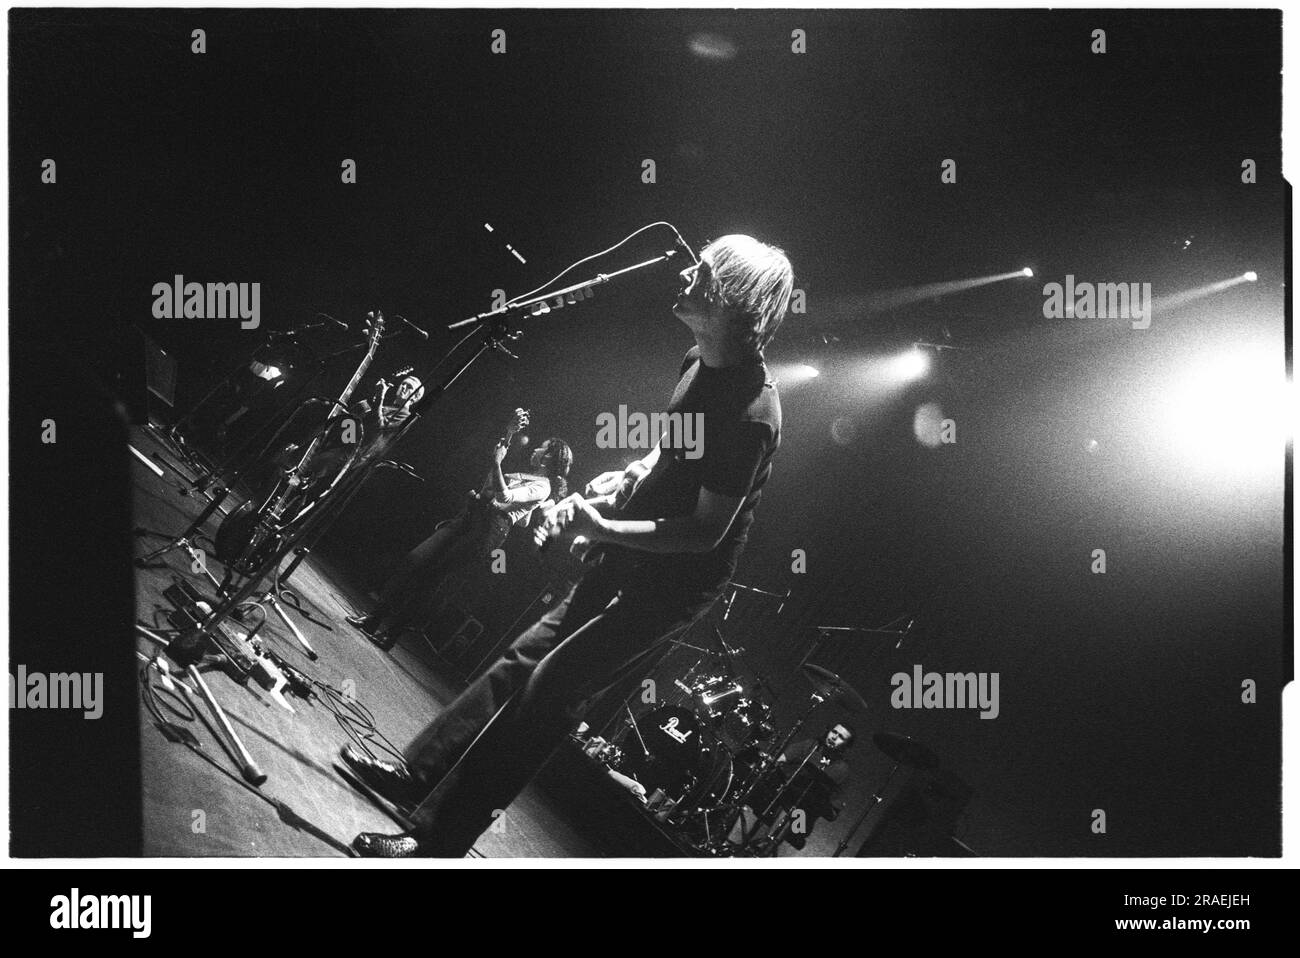 Paul weller Cut Out Stock Images & Pictures - Alamy